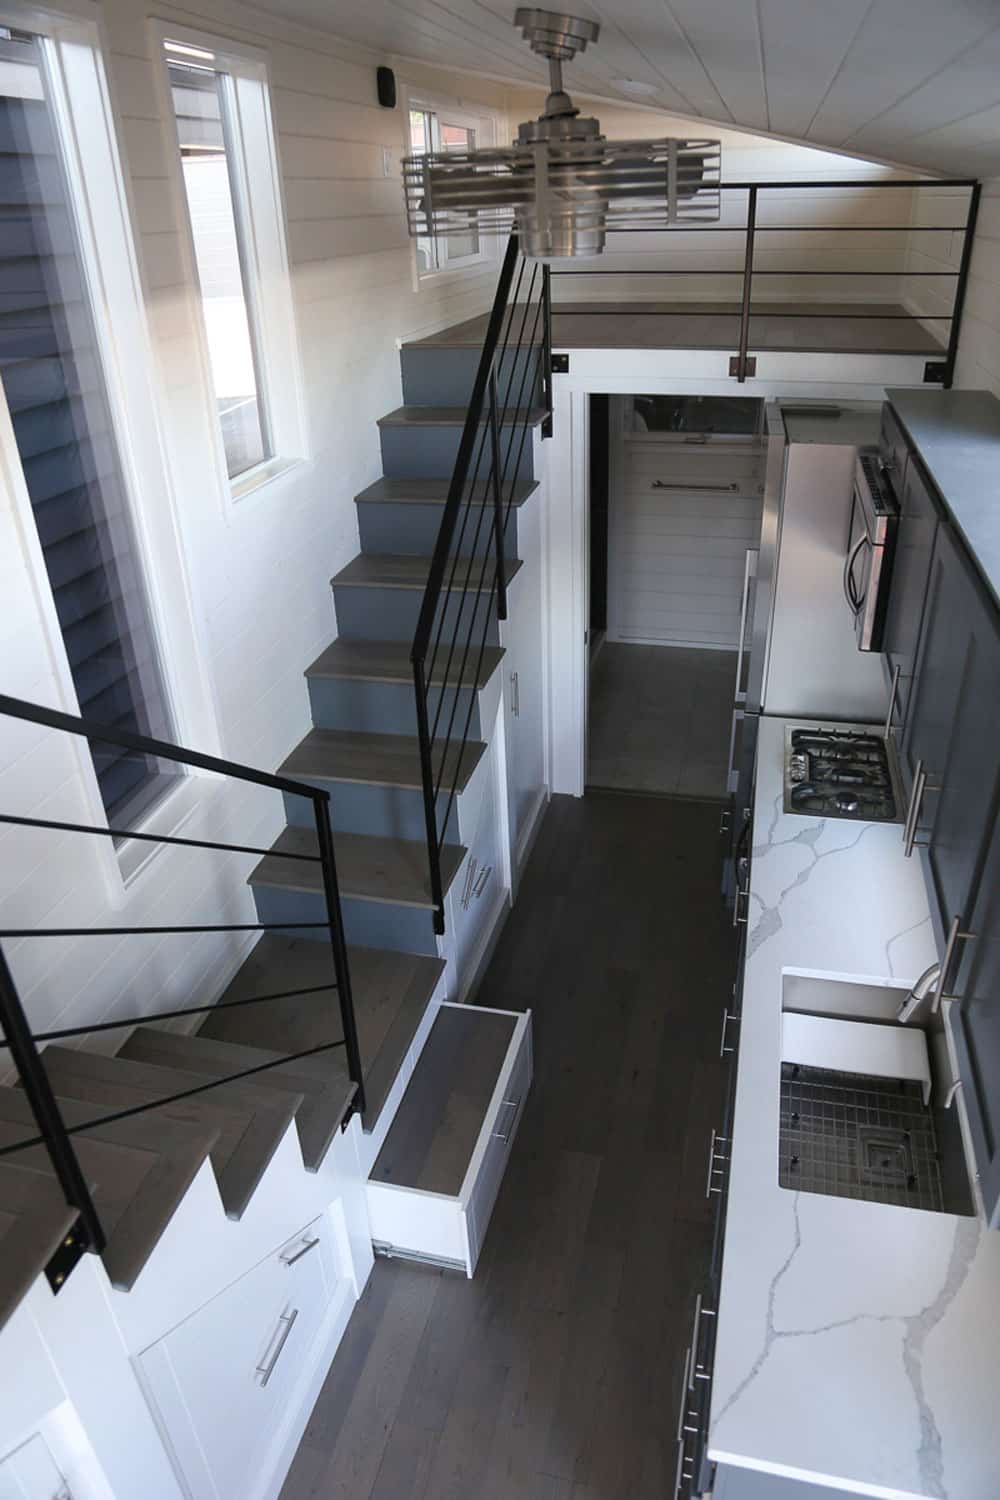 Stairways to lofts in the Contempo custom tiny home